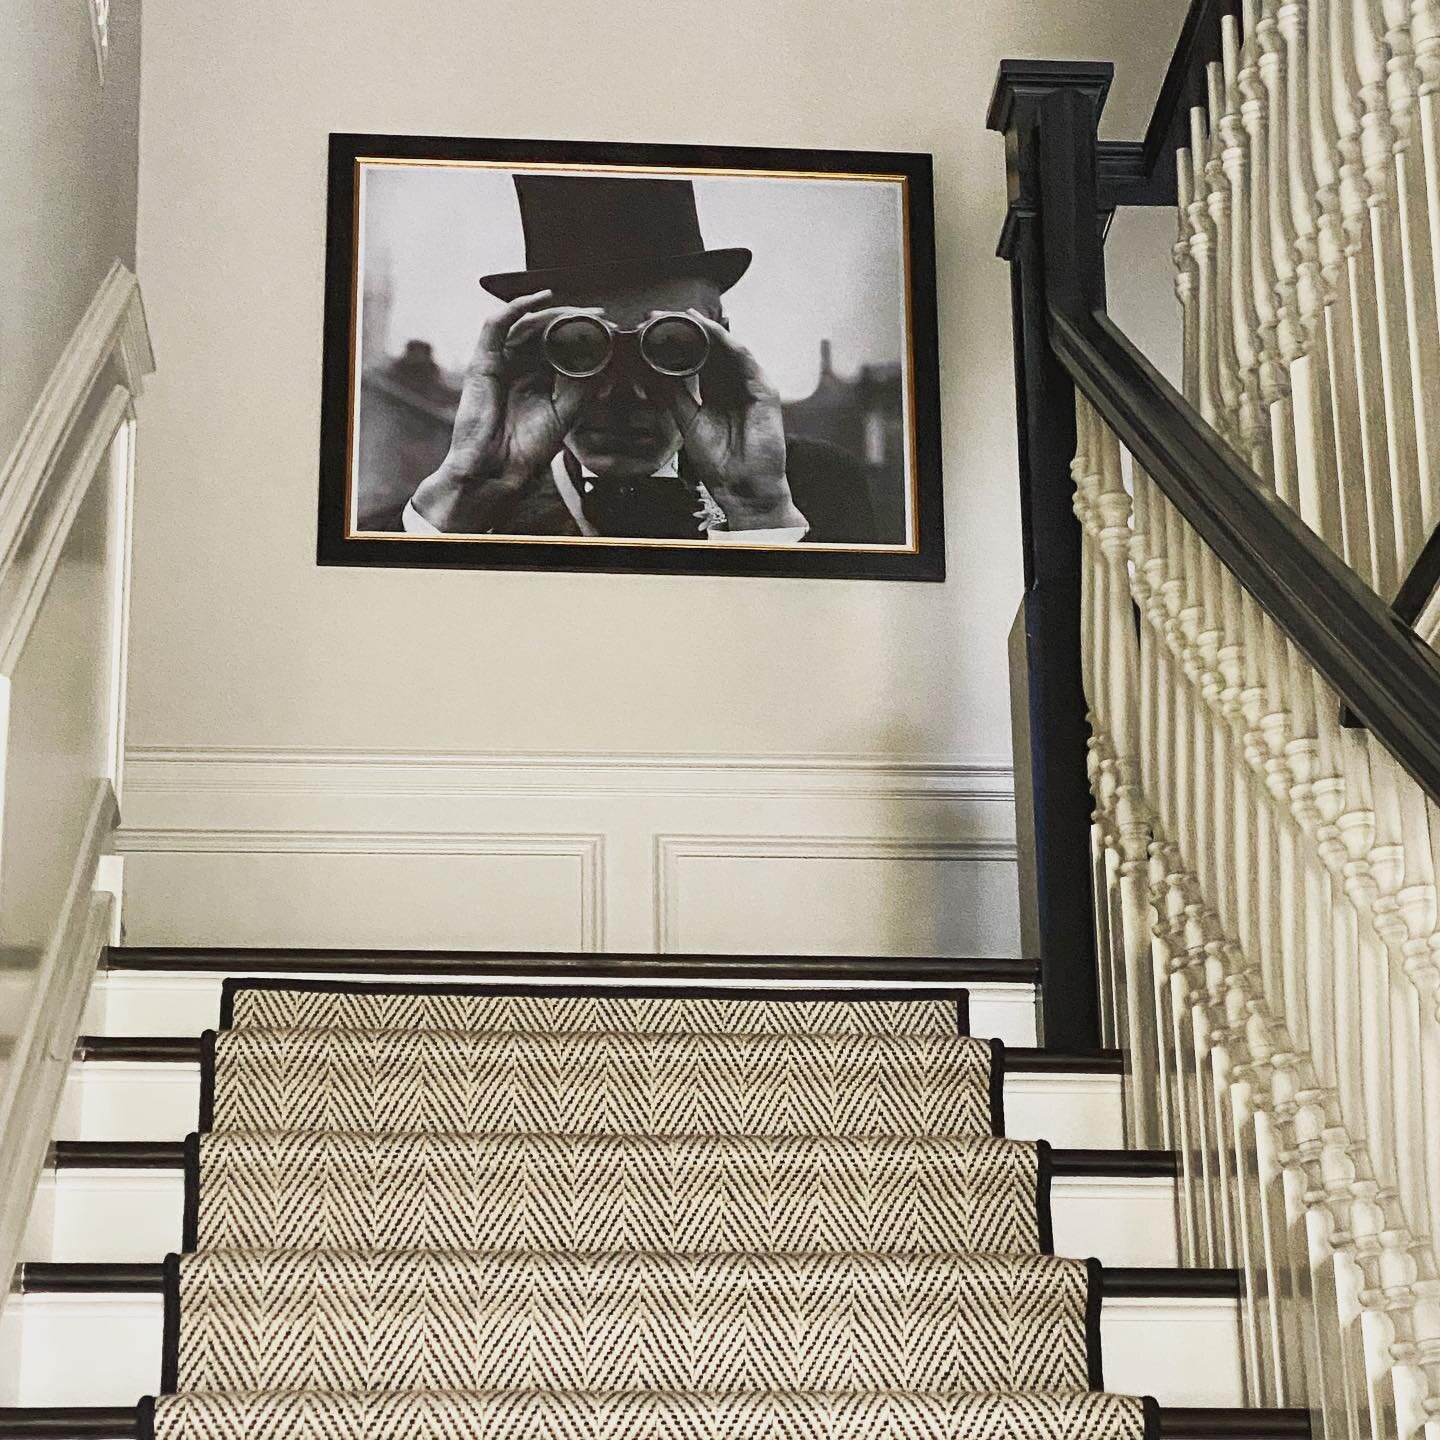 Eye spy&hellip; a top of stair photo piece that will never get old 🤓😎🐴❤️